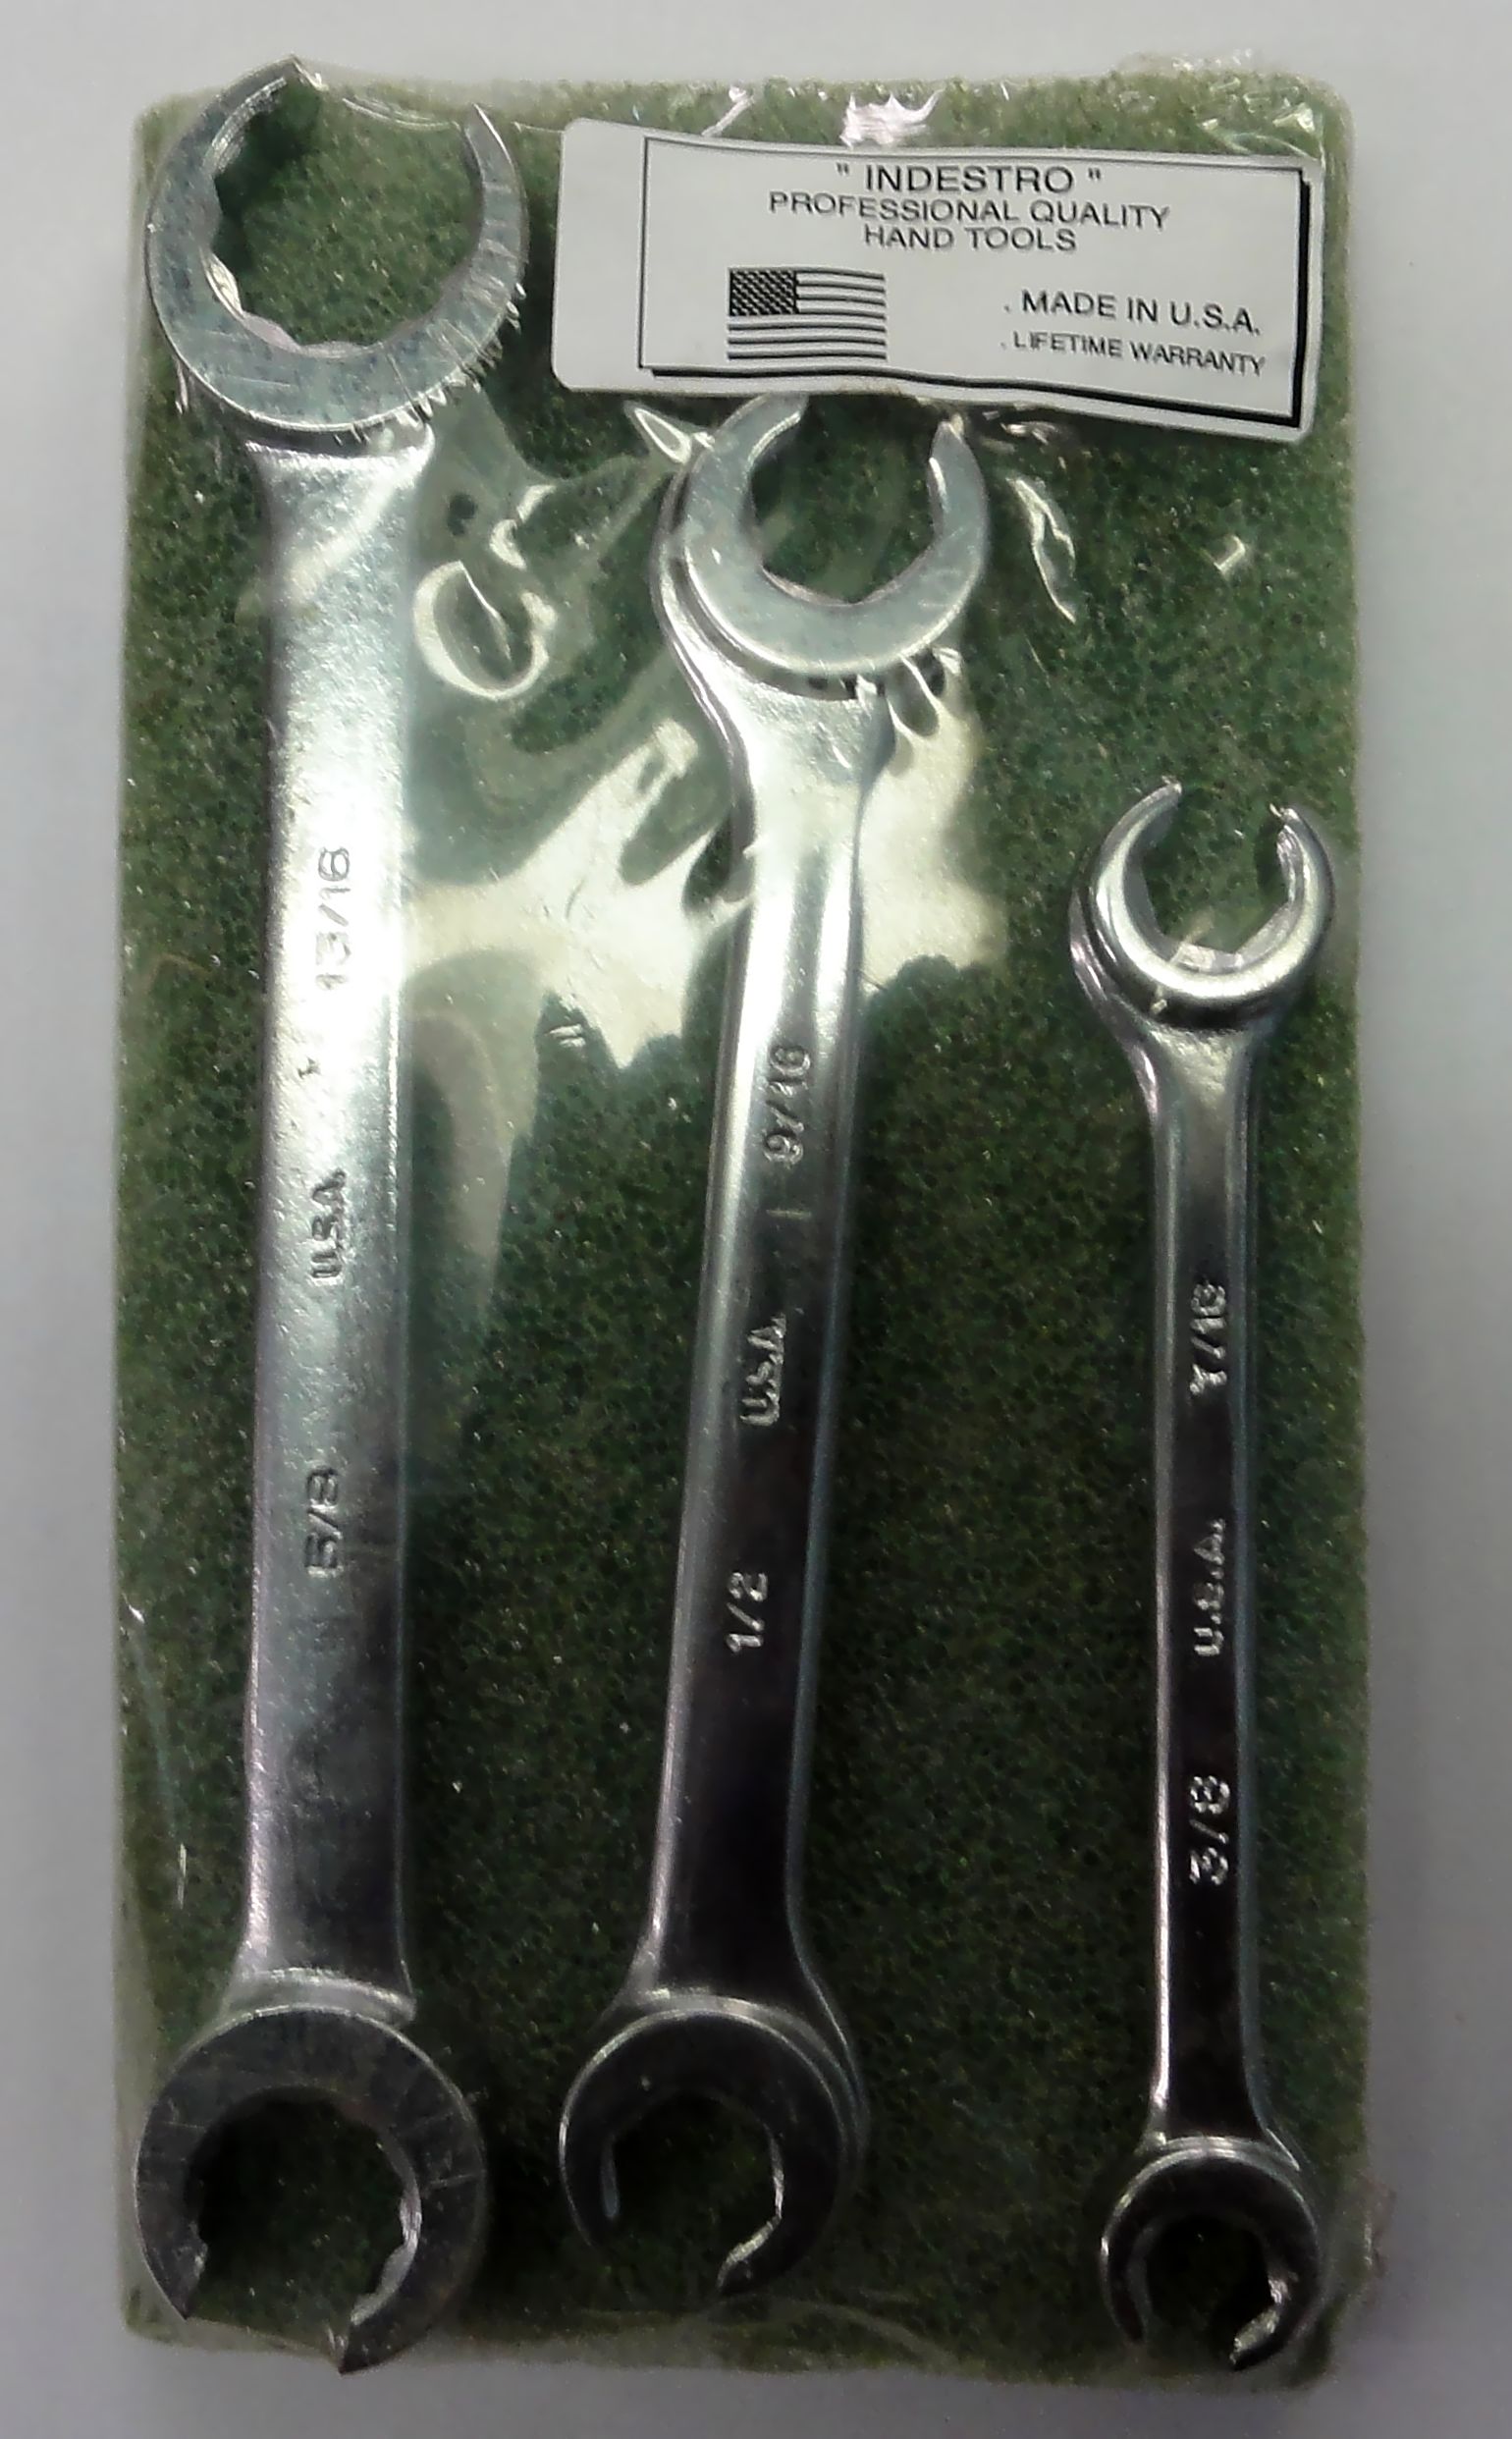 INDUSTRO 3 pc Line Wrench Set 3/8" to 13/16" Made in U.S.A.